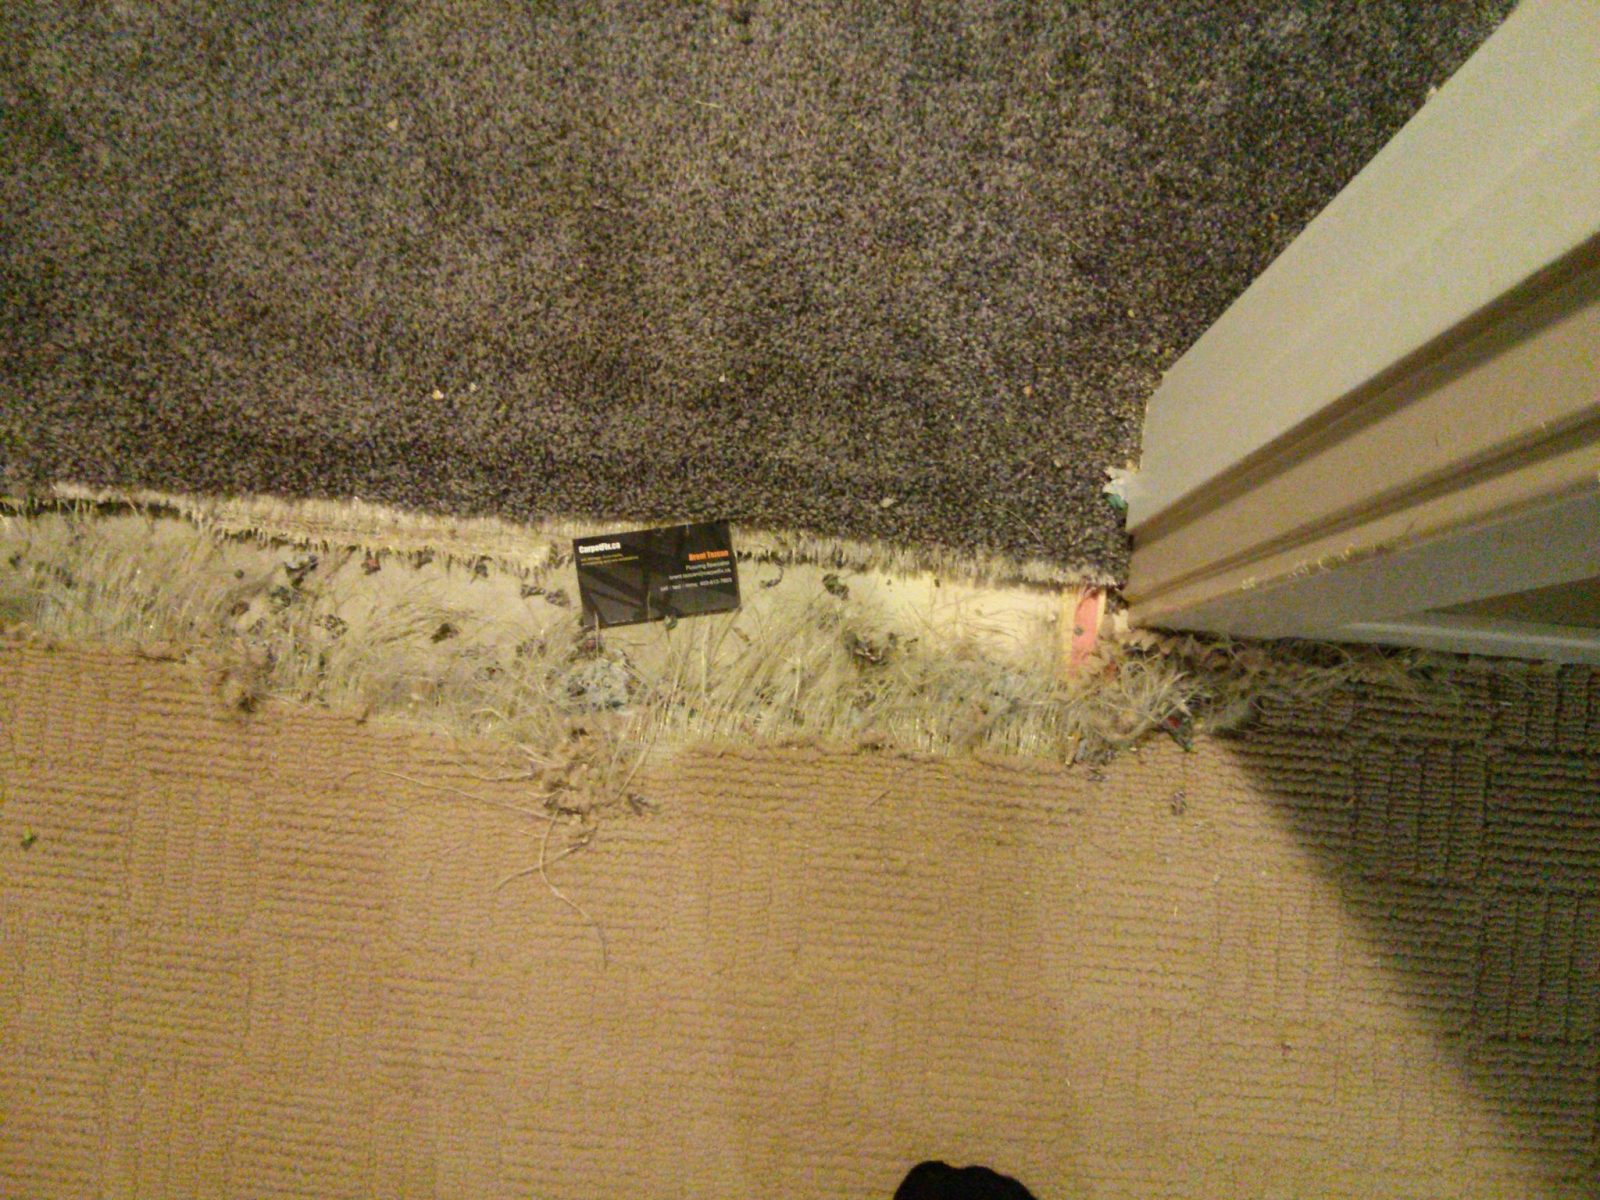 Dog damaged carpet repair with the remnants